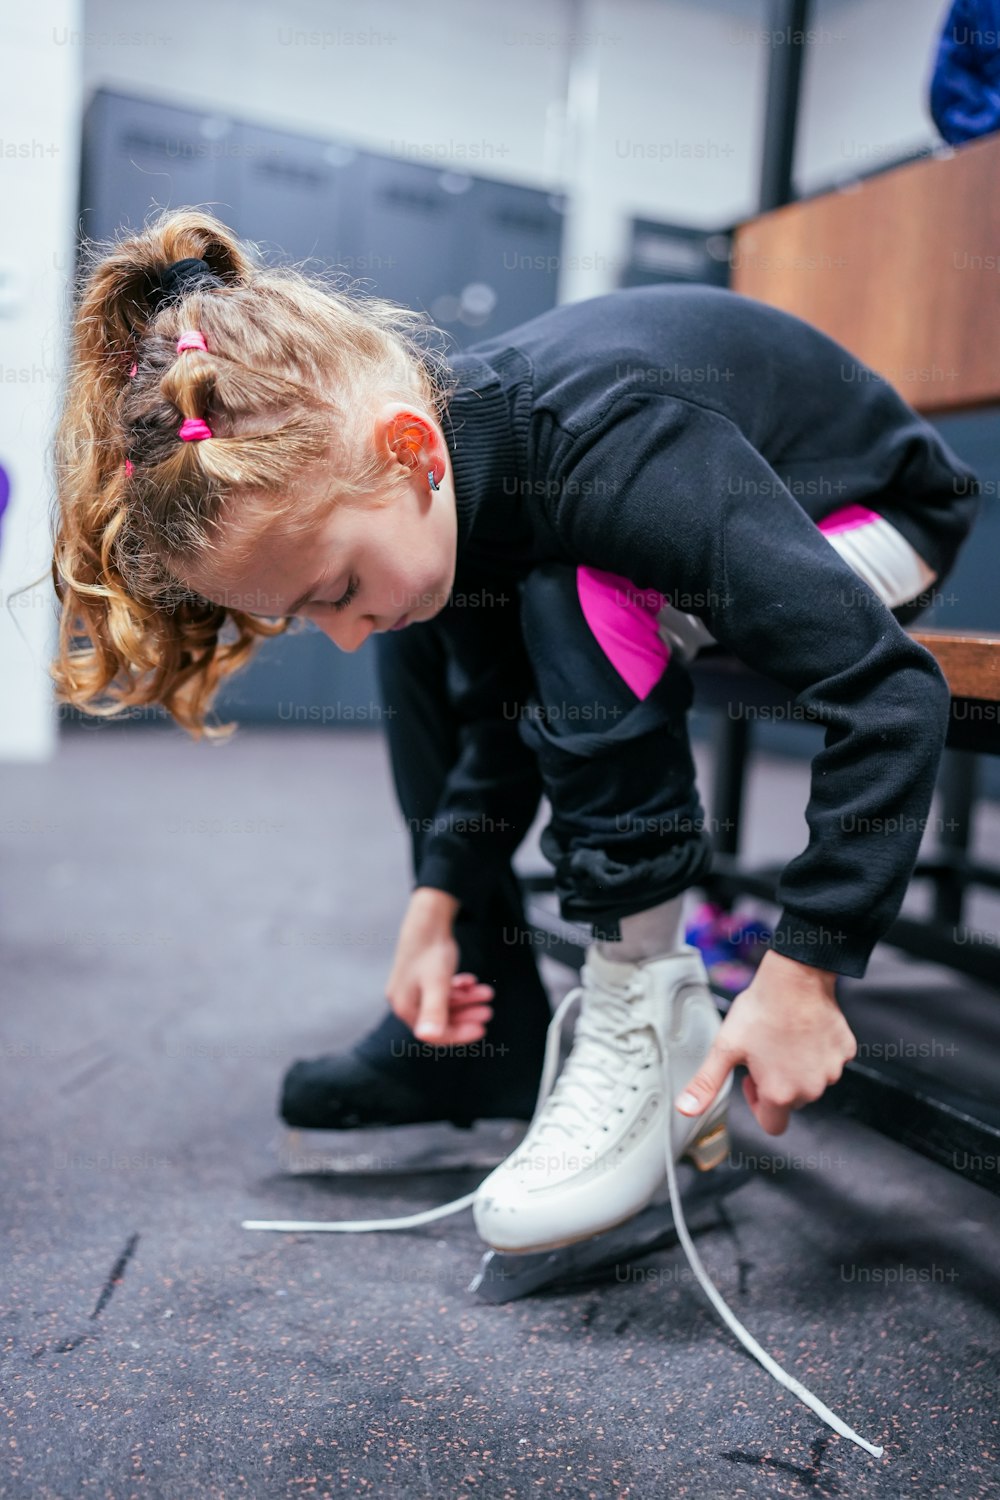 a young girl tying up her tennis shoes